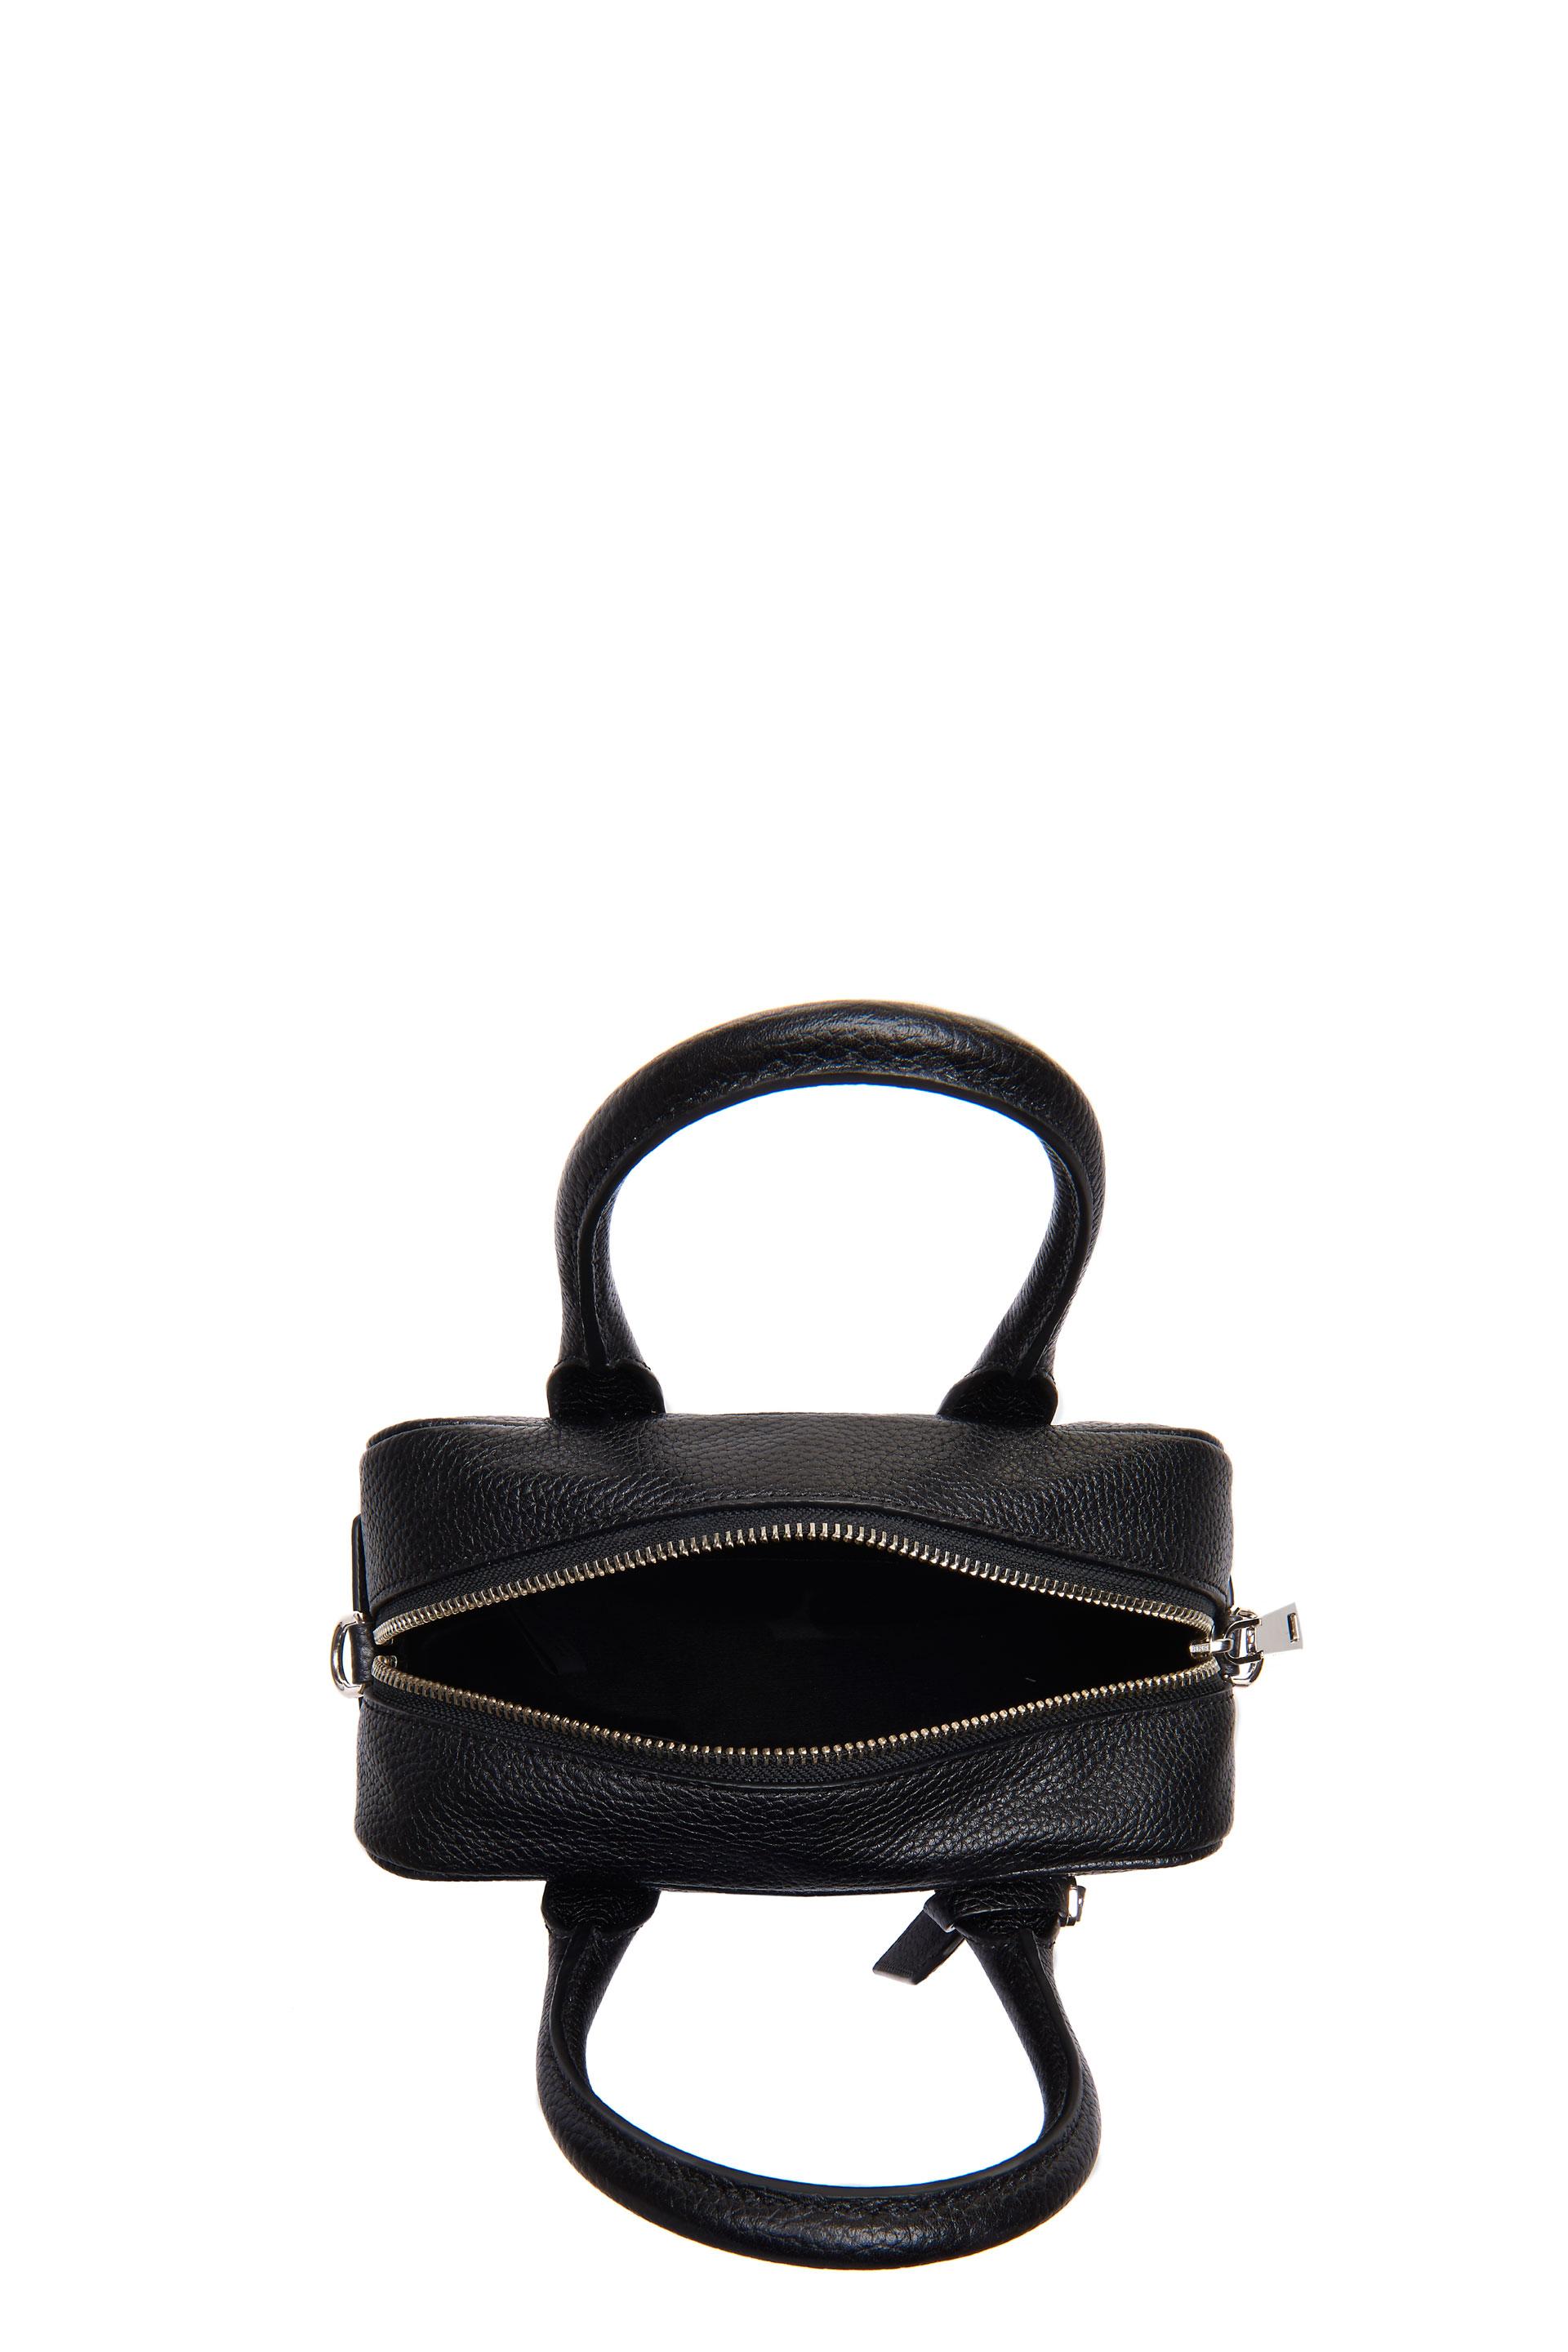 MARC JACOBS Gotham Small Bauletto